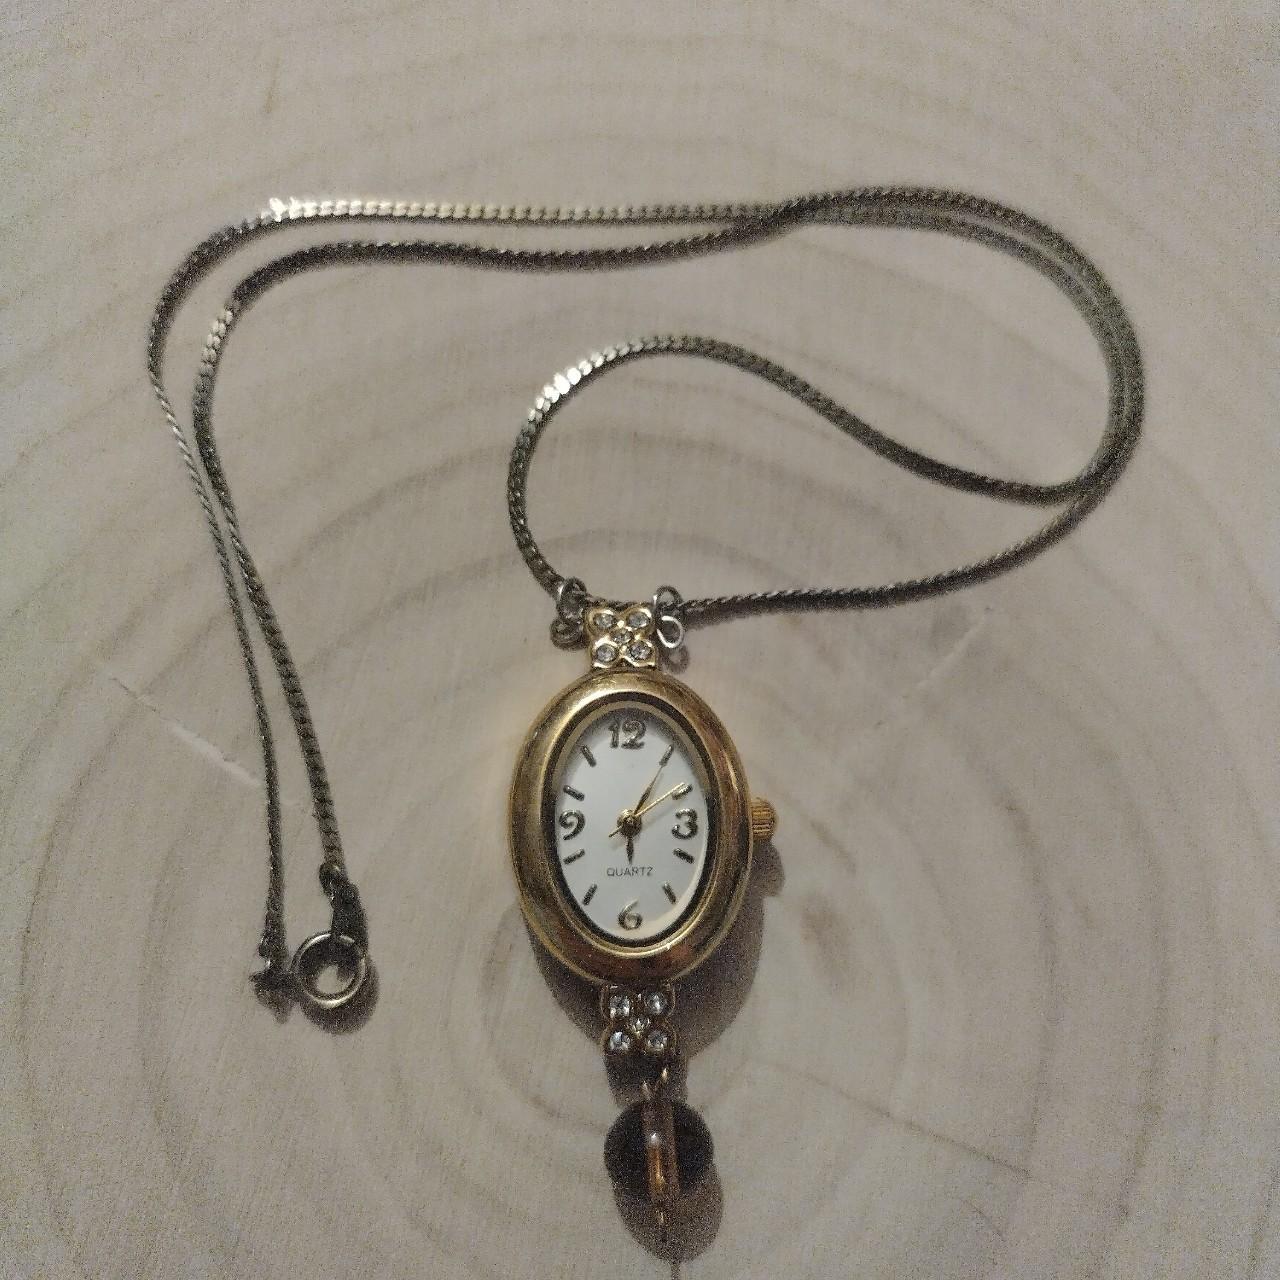 Vintage watch necklace ⌚ - made from upcycled... - Depop